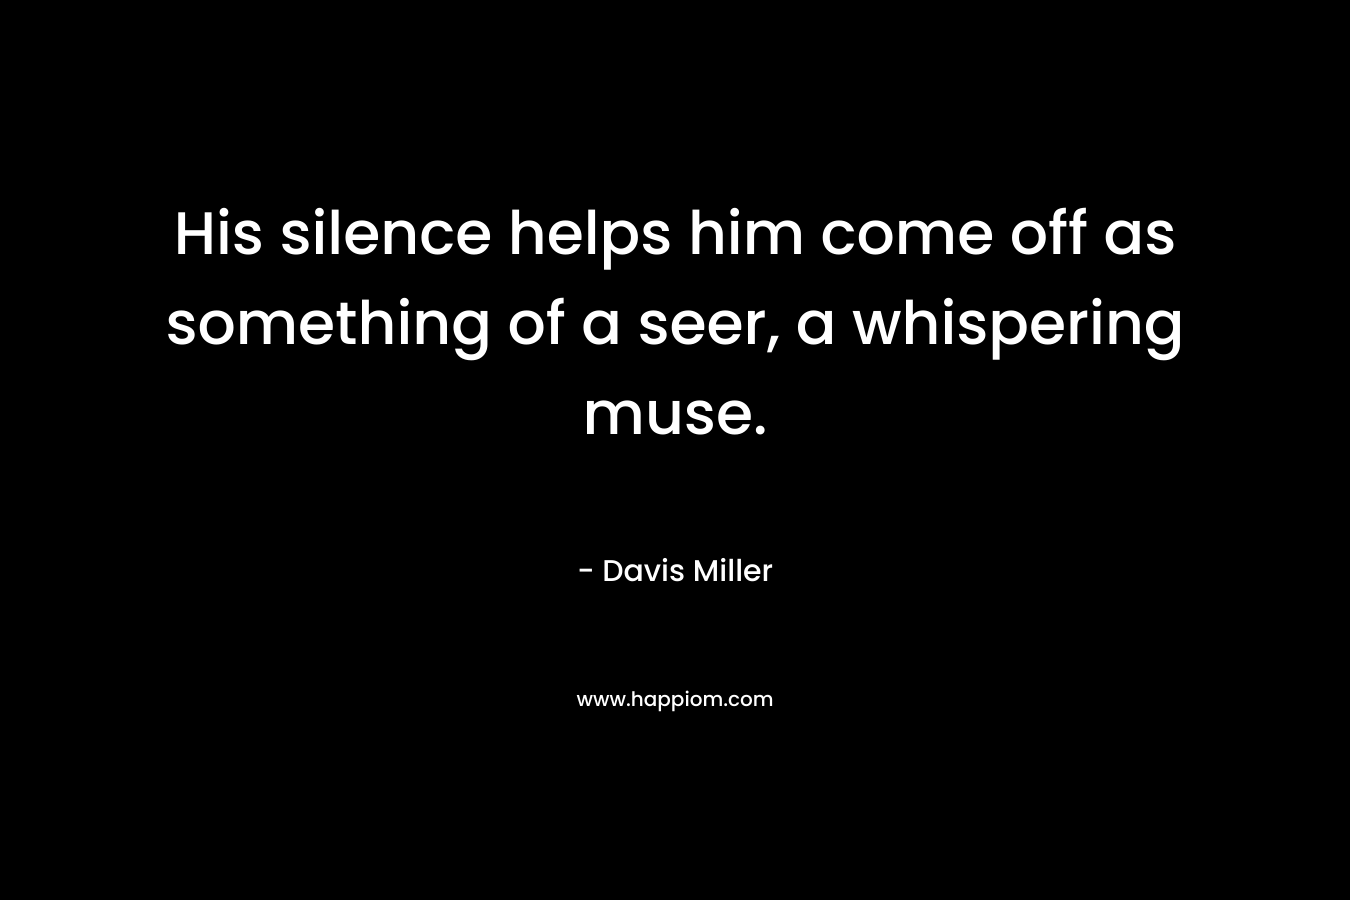 His silence helps him come off as something of a seer, a whispering muse. – Davis Miller